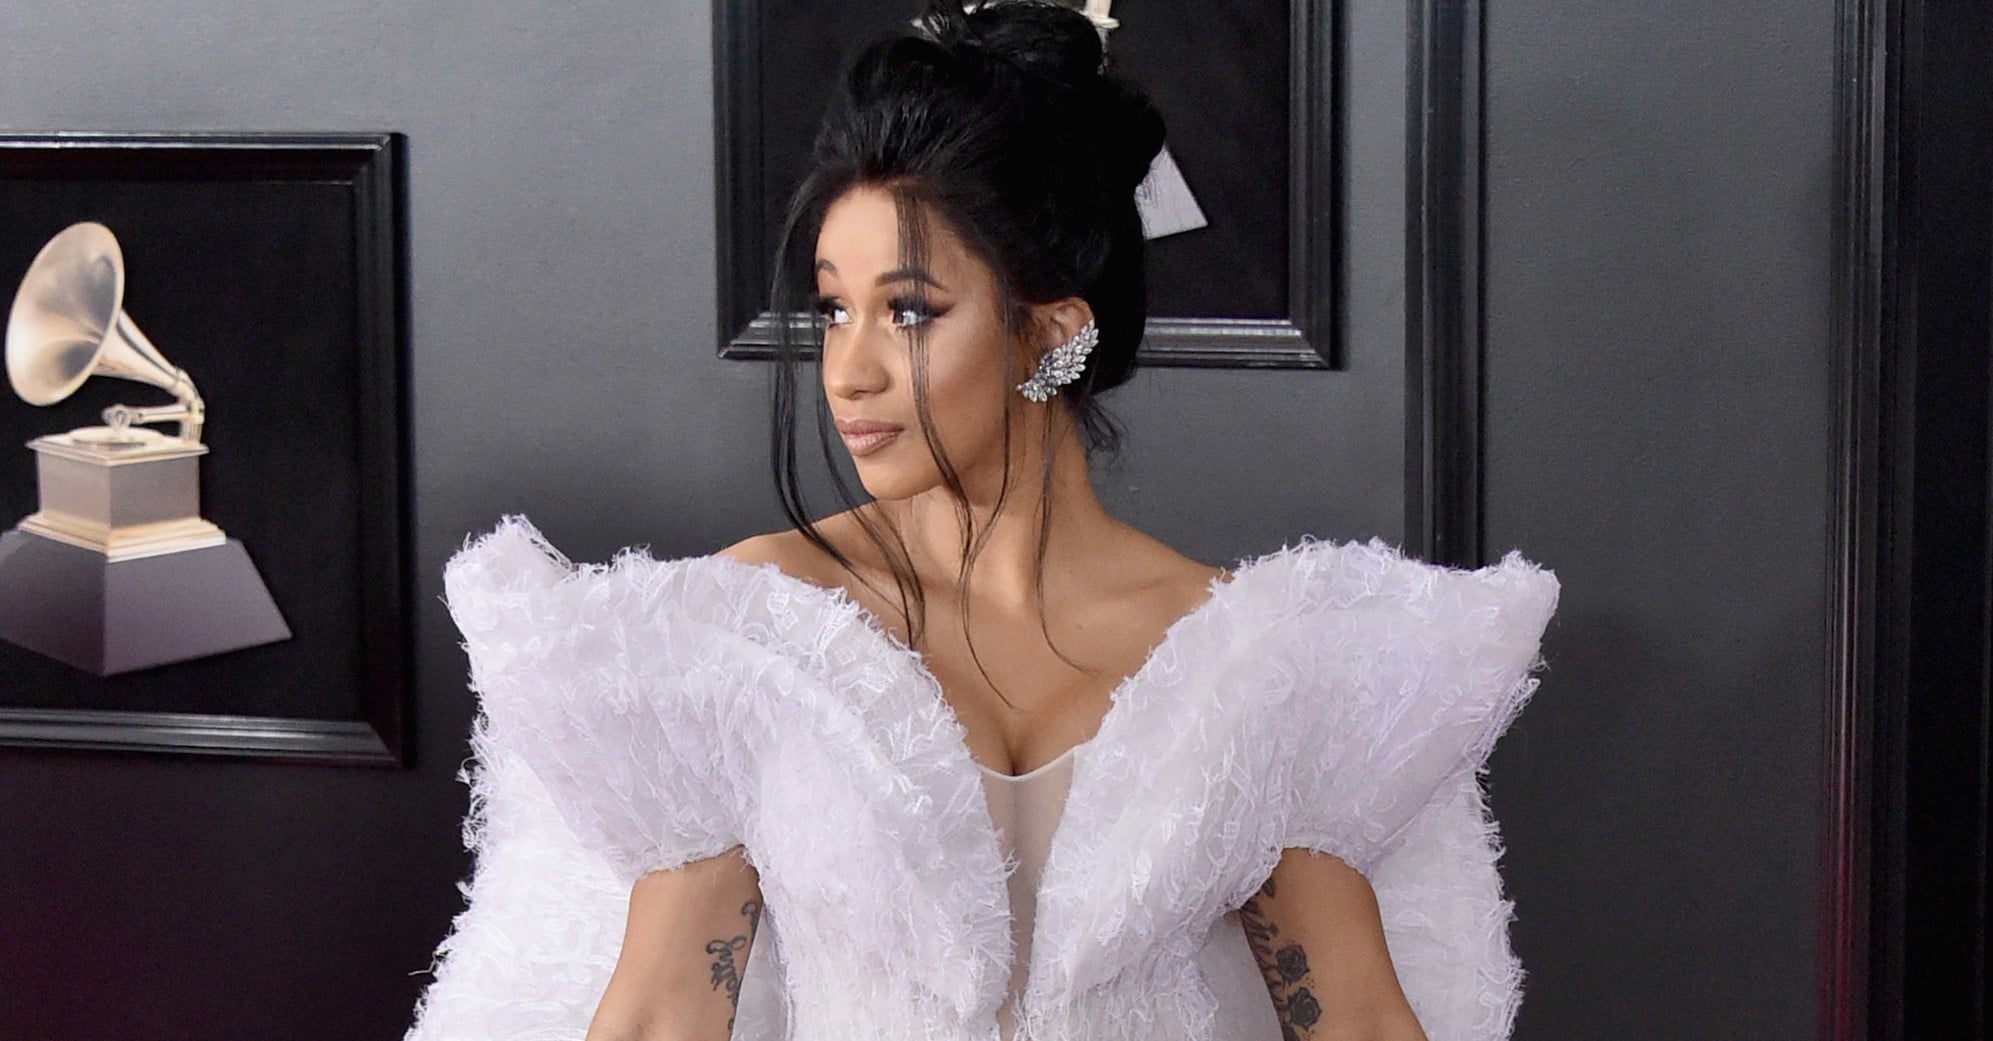 Cardi B Goes Glam in White for Grammys 2018: Photo 4022778